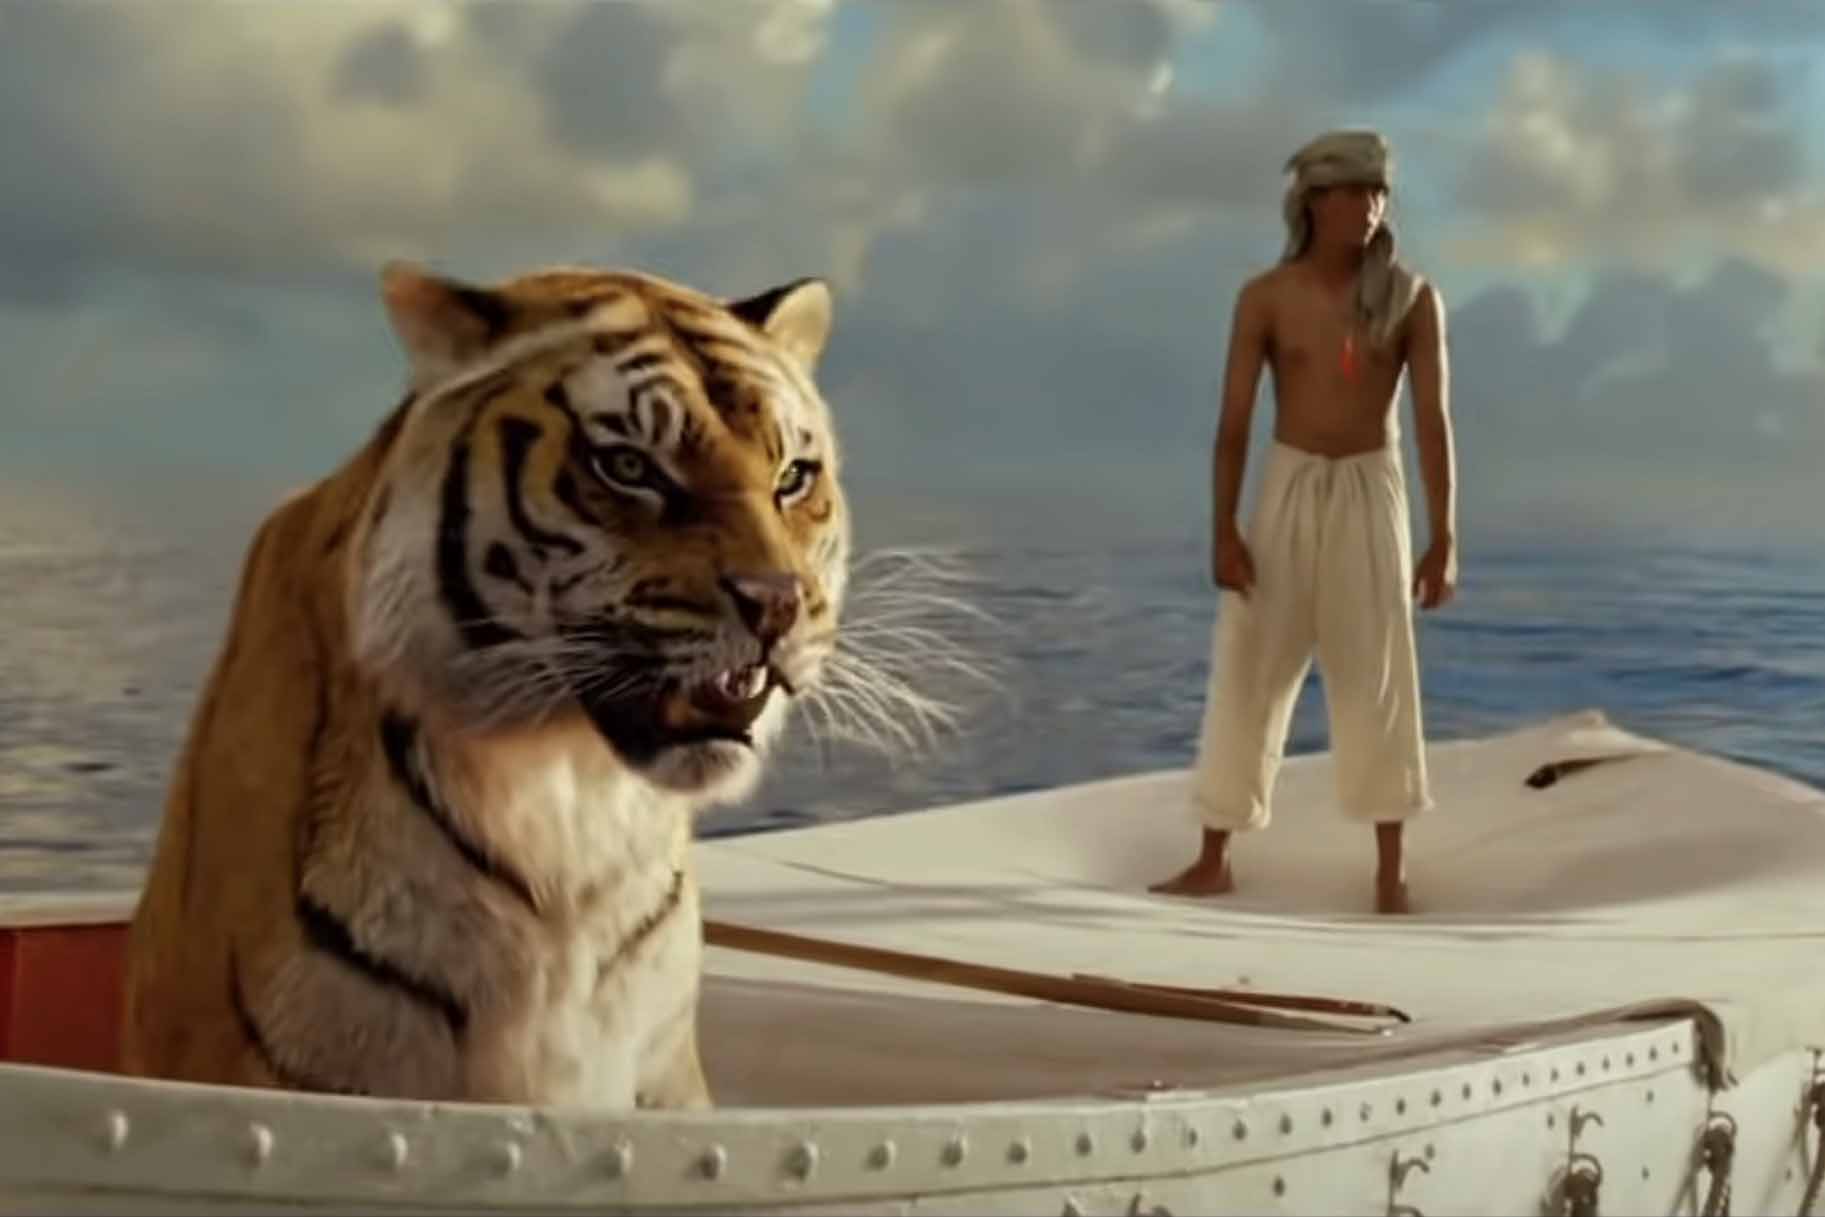 Pi Patel (Suraj Sharma) floats on a boat with a tiger in Life of Pi (2012).